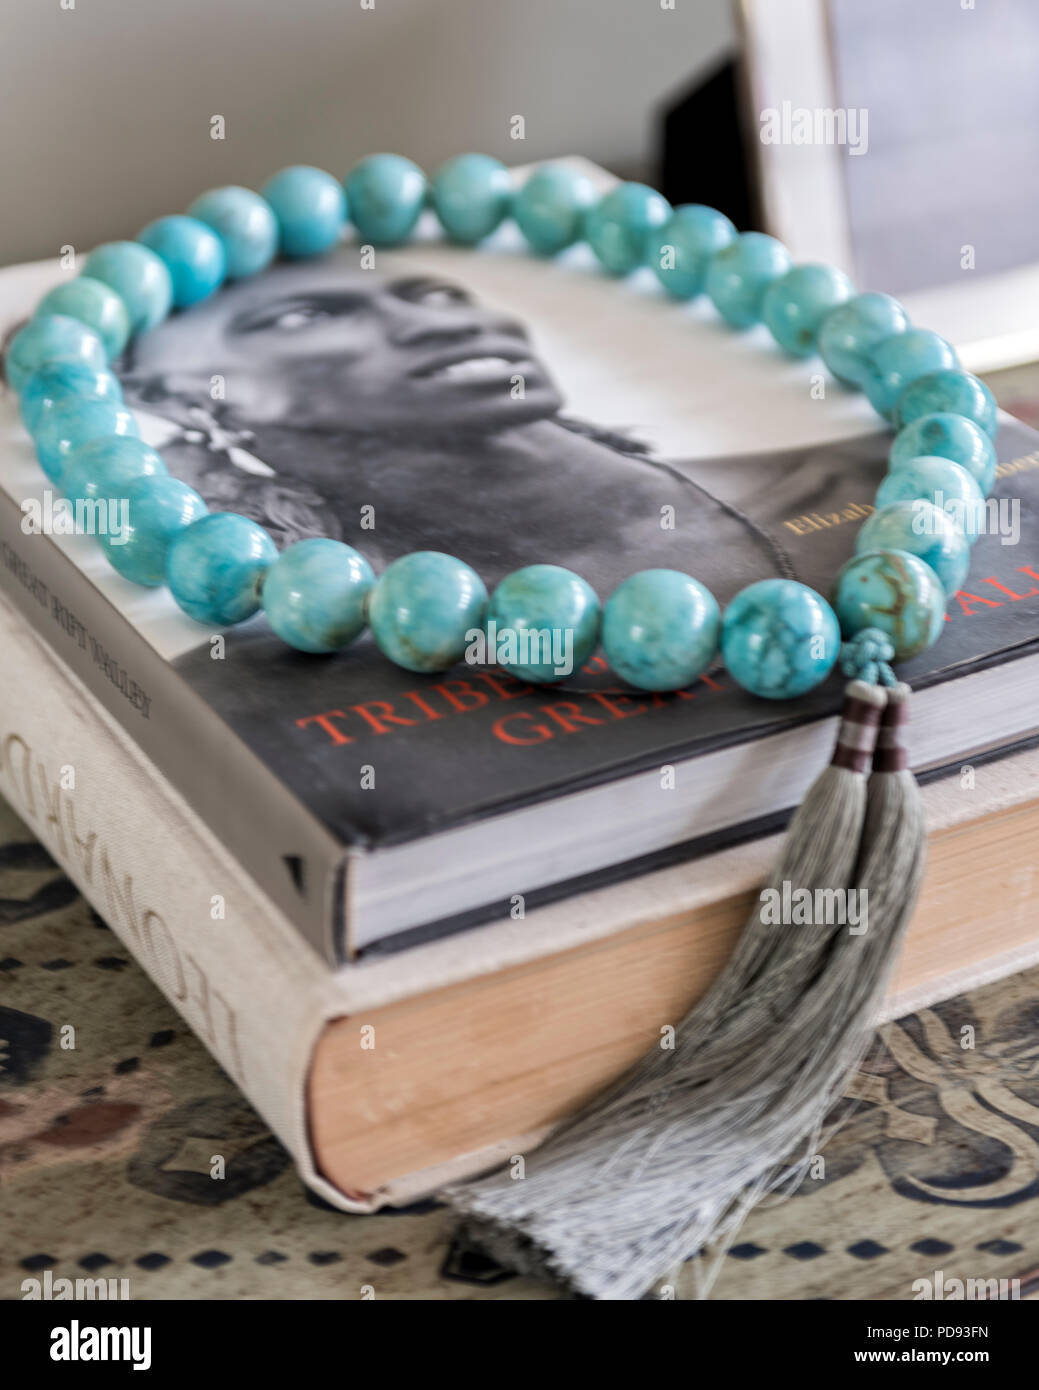 Turquoise beaded bracelet on top of photography book Stock Photo